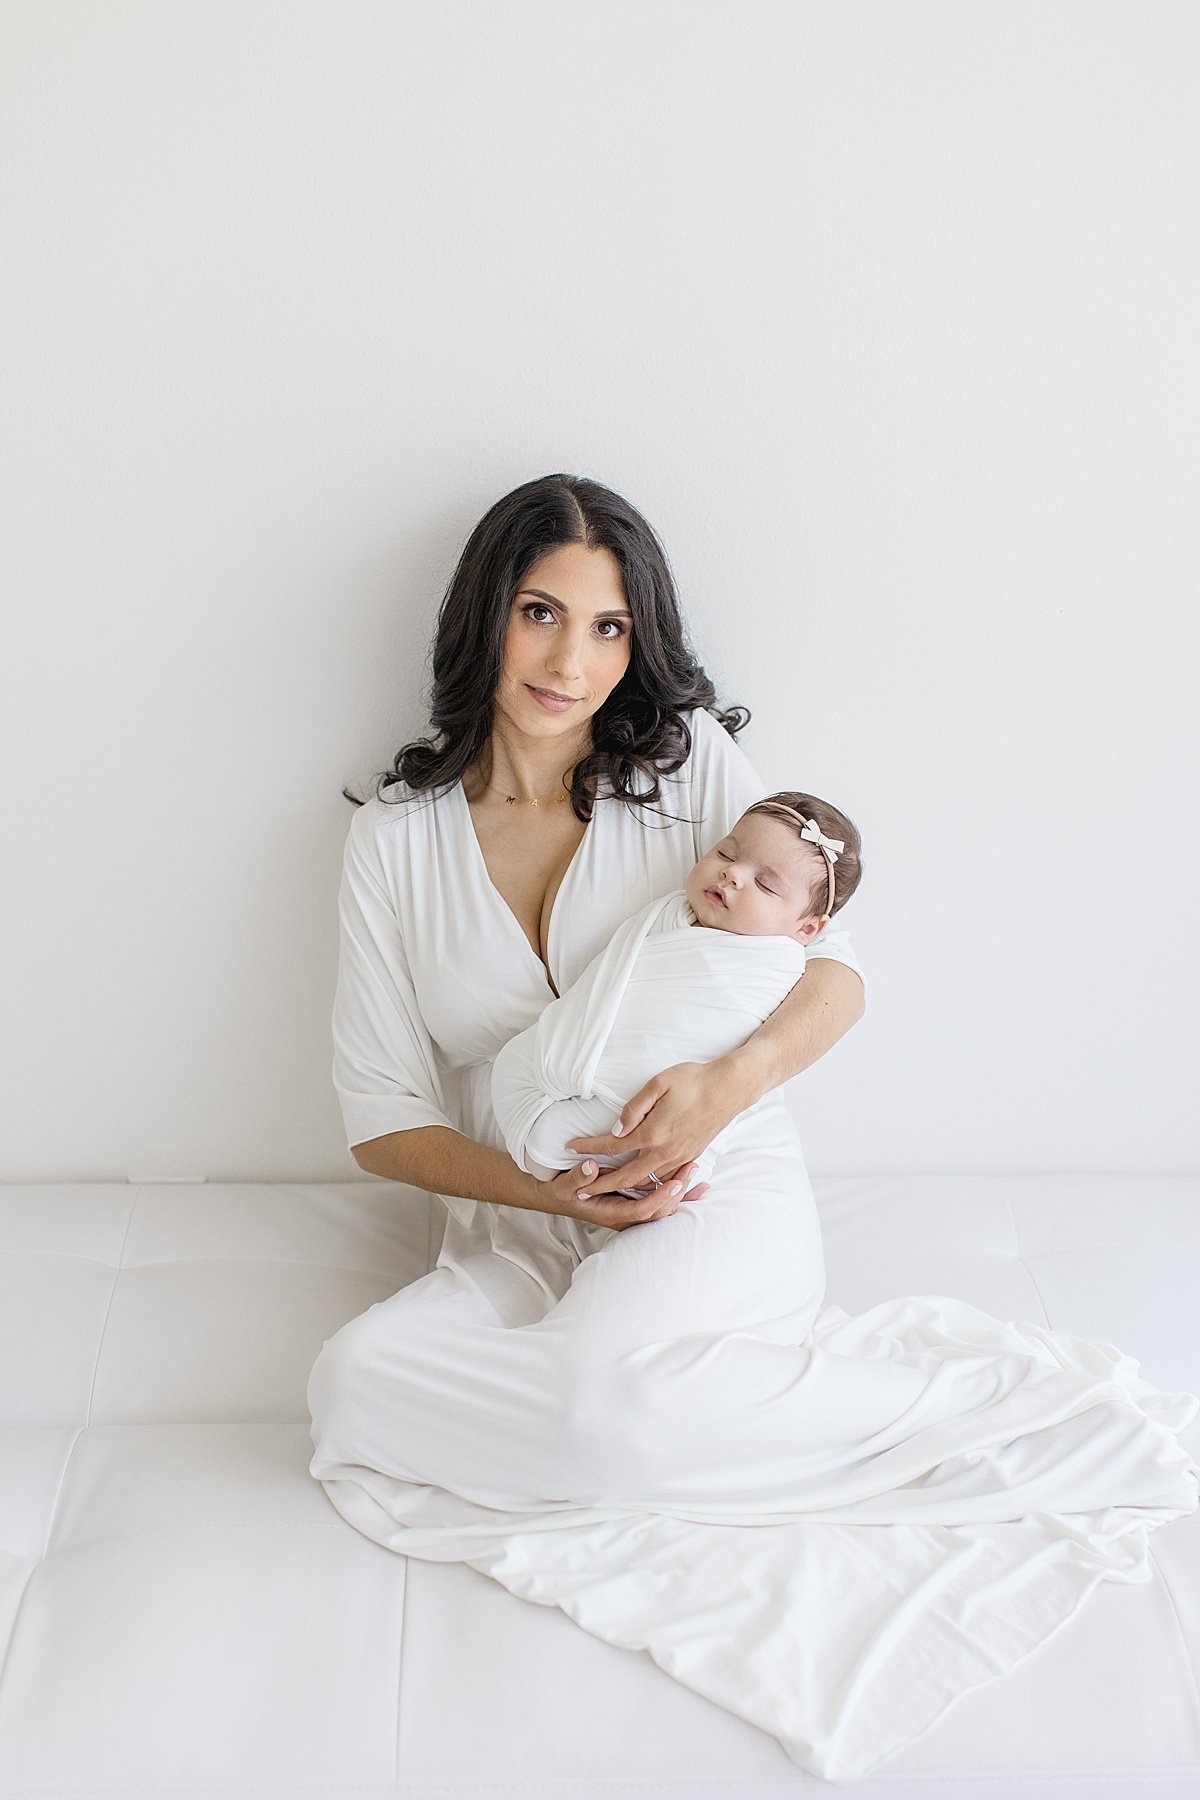 Mom holding sleeping daughter during Newborn Photography Session with Ambre Williams in her studio in Newport Beach, California